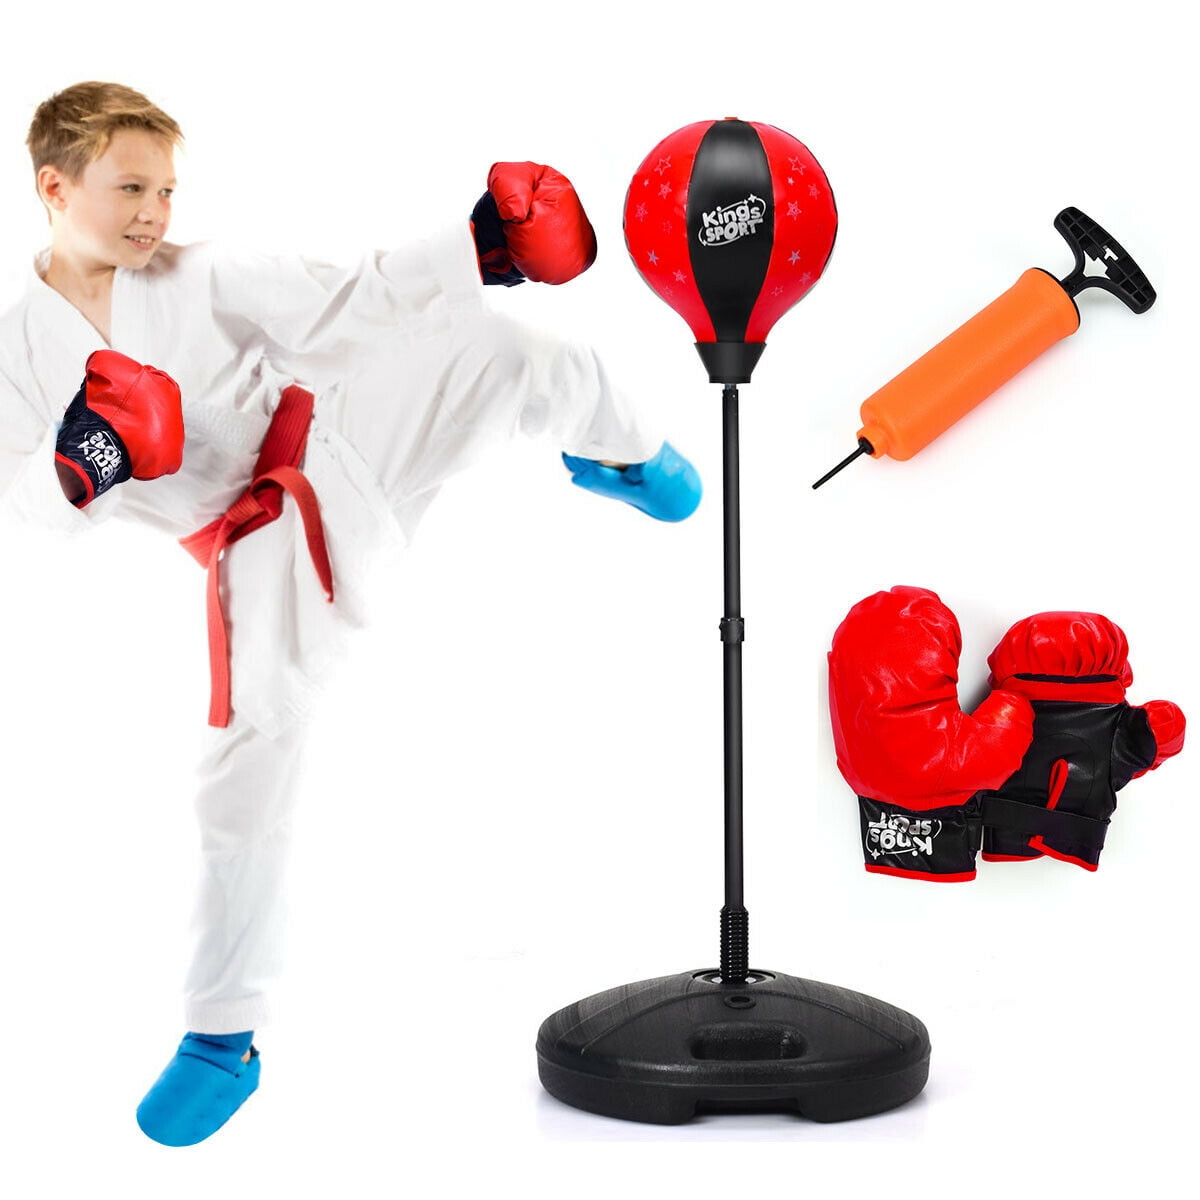 PUNCH BAG BALL BOXING SET AND MITTS GLOVES KIT FREE STANDING FOR KIDS PLAY GIFT 